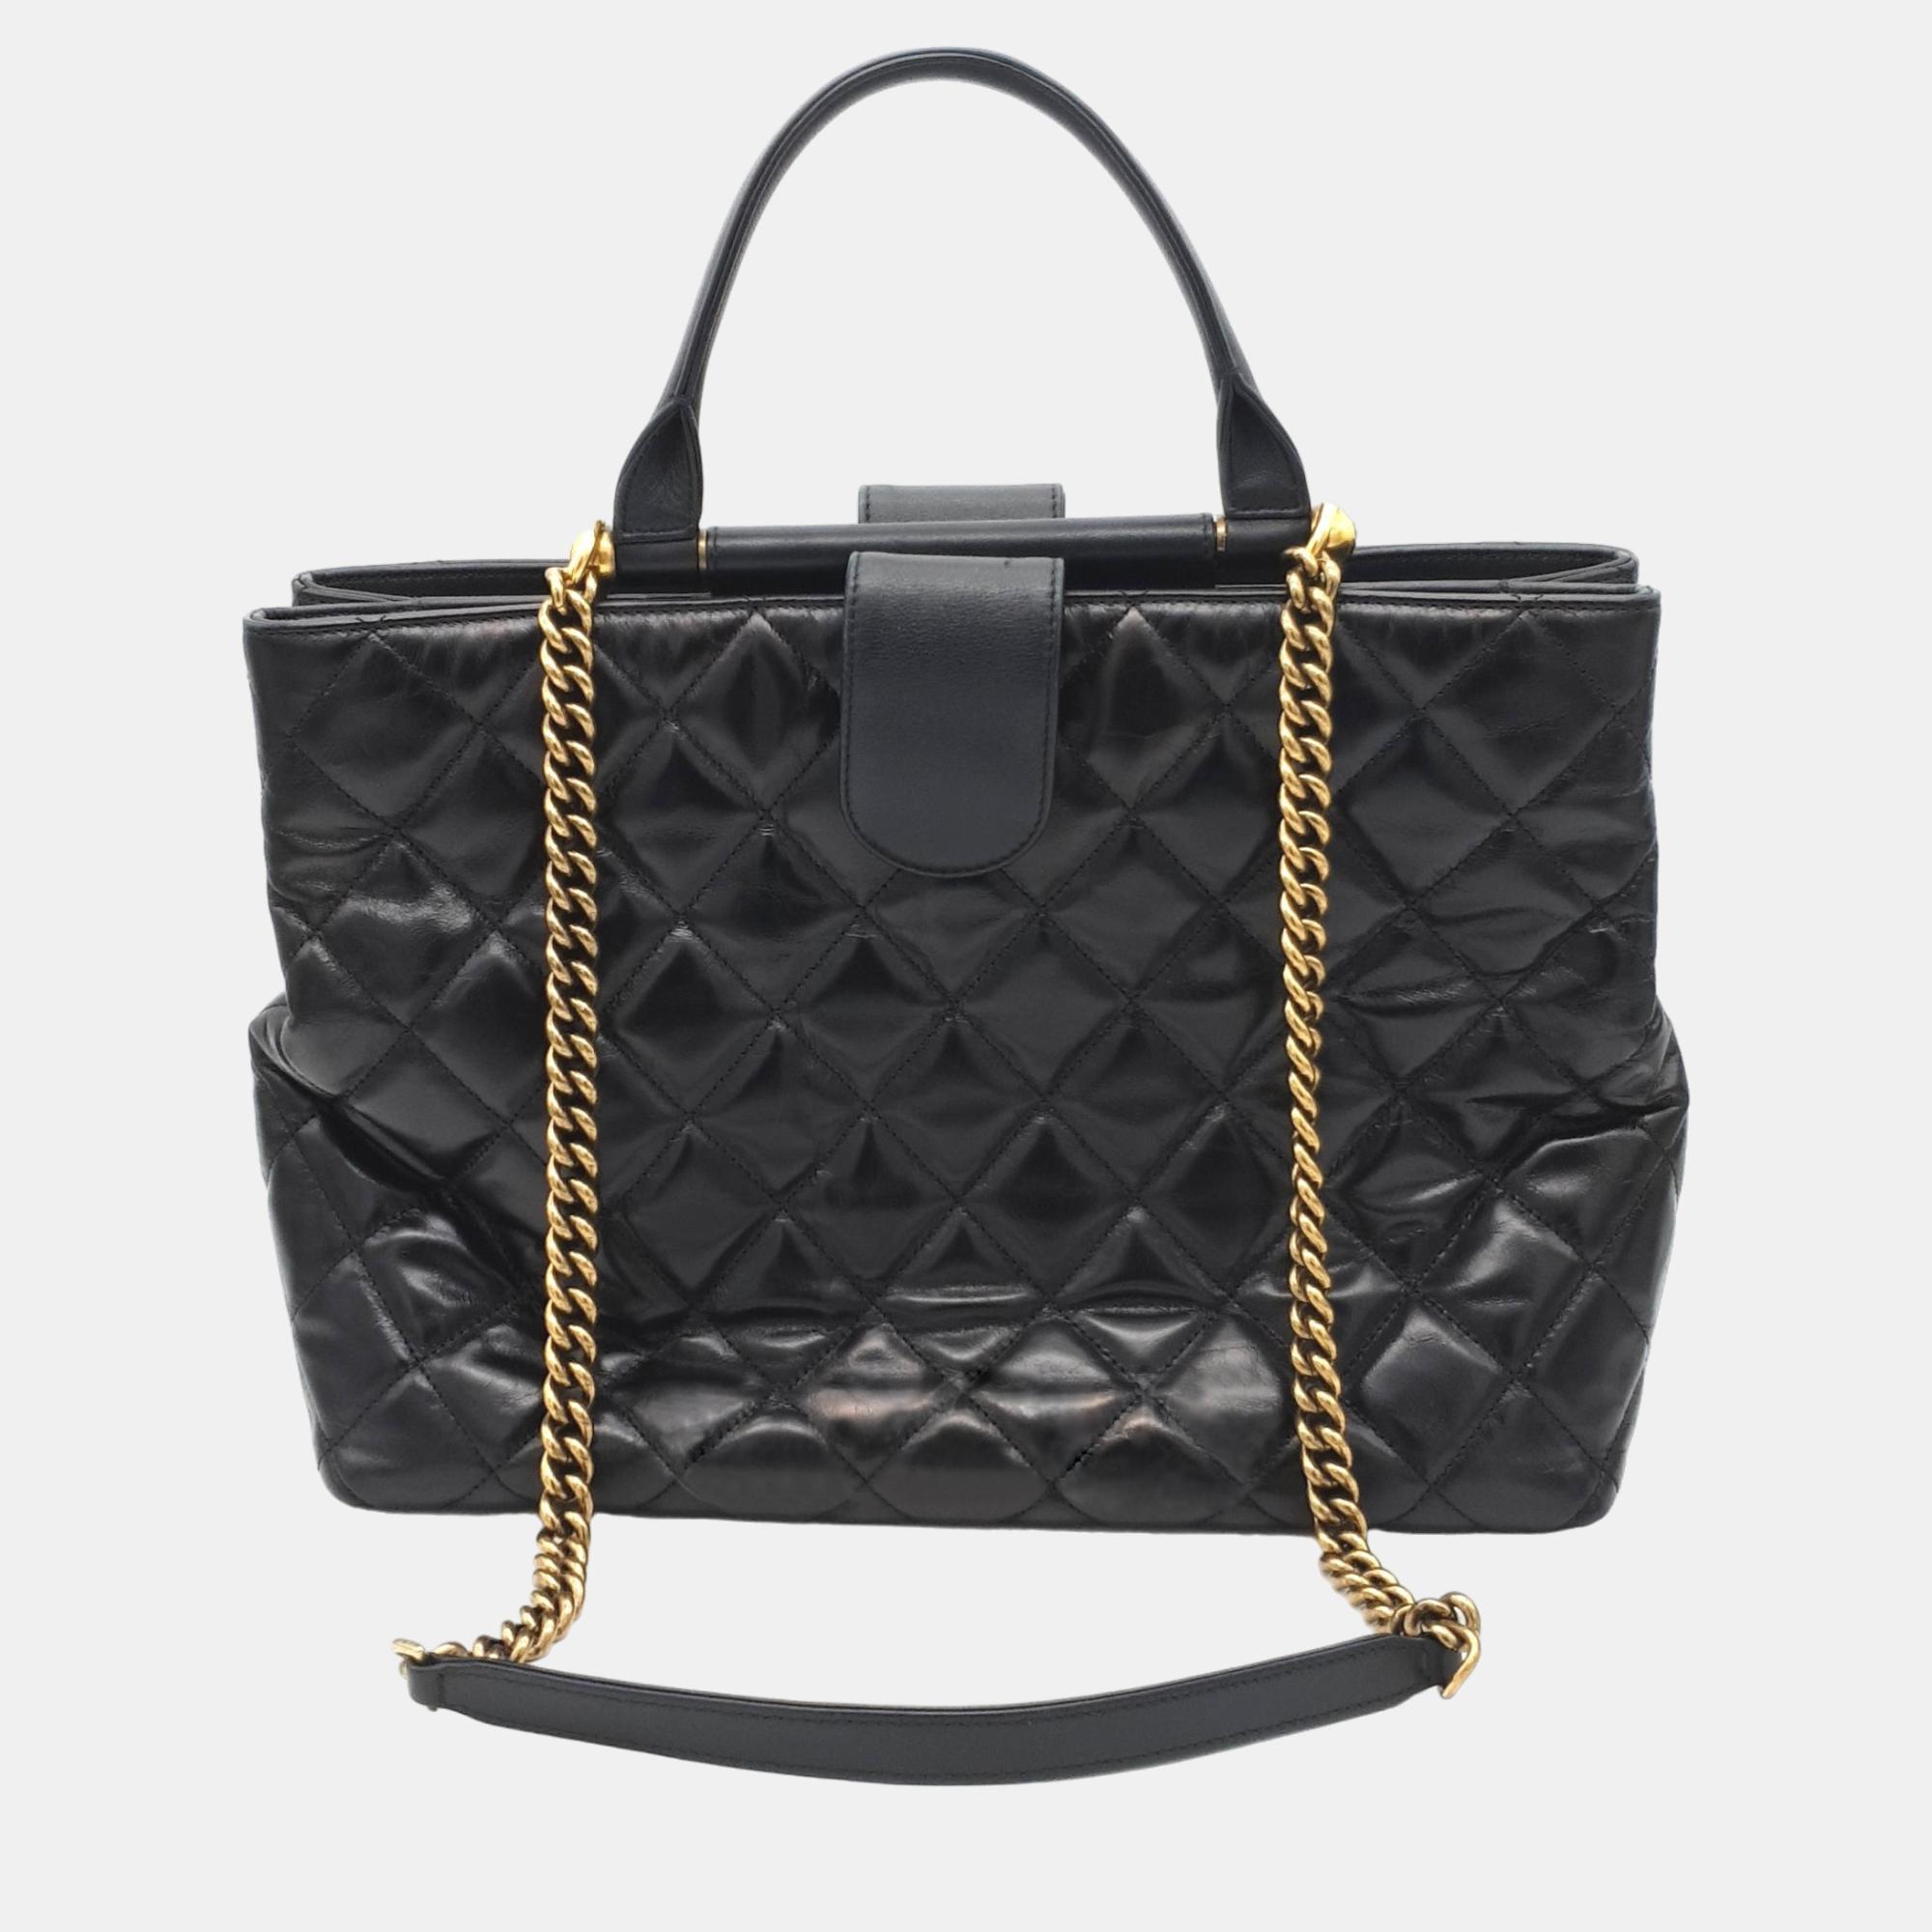 Chanel Black Quilted Leather CC Tote Bag